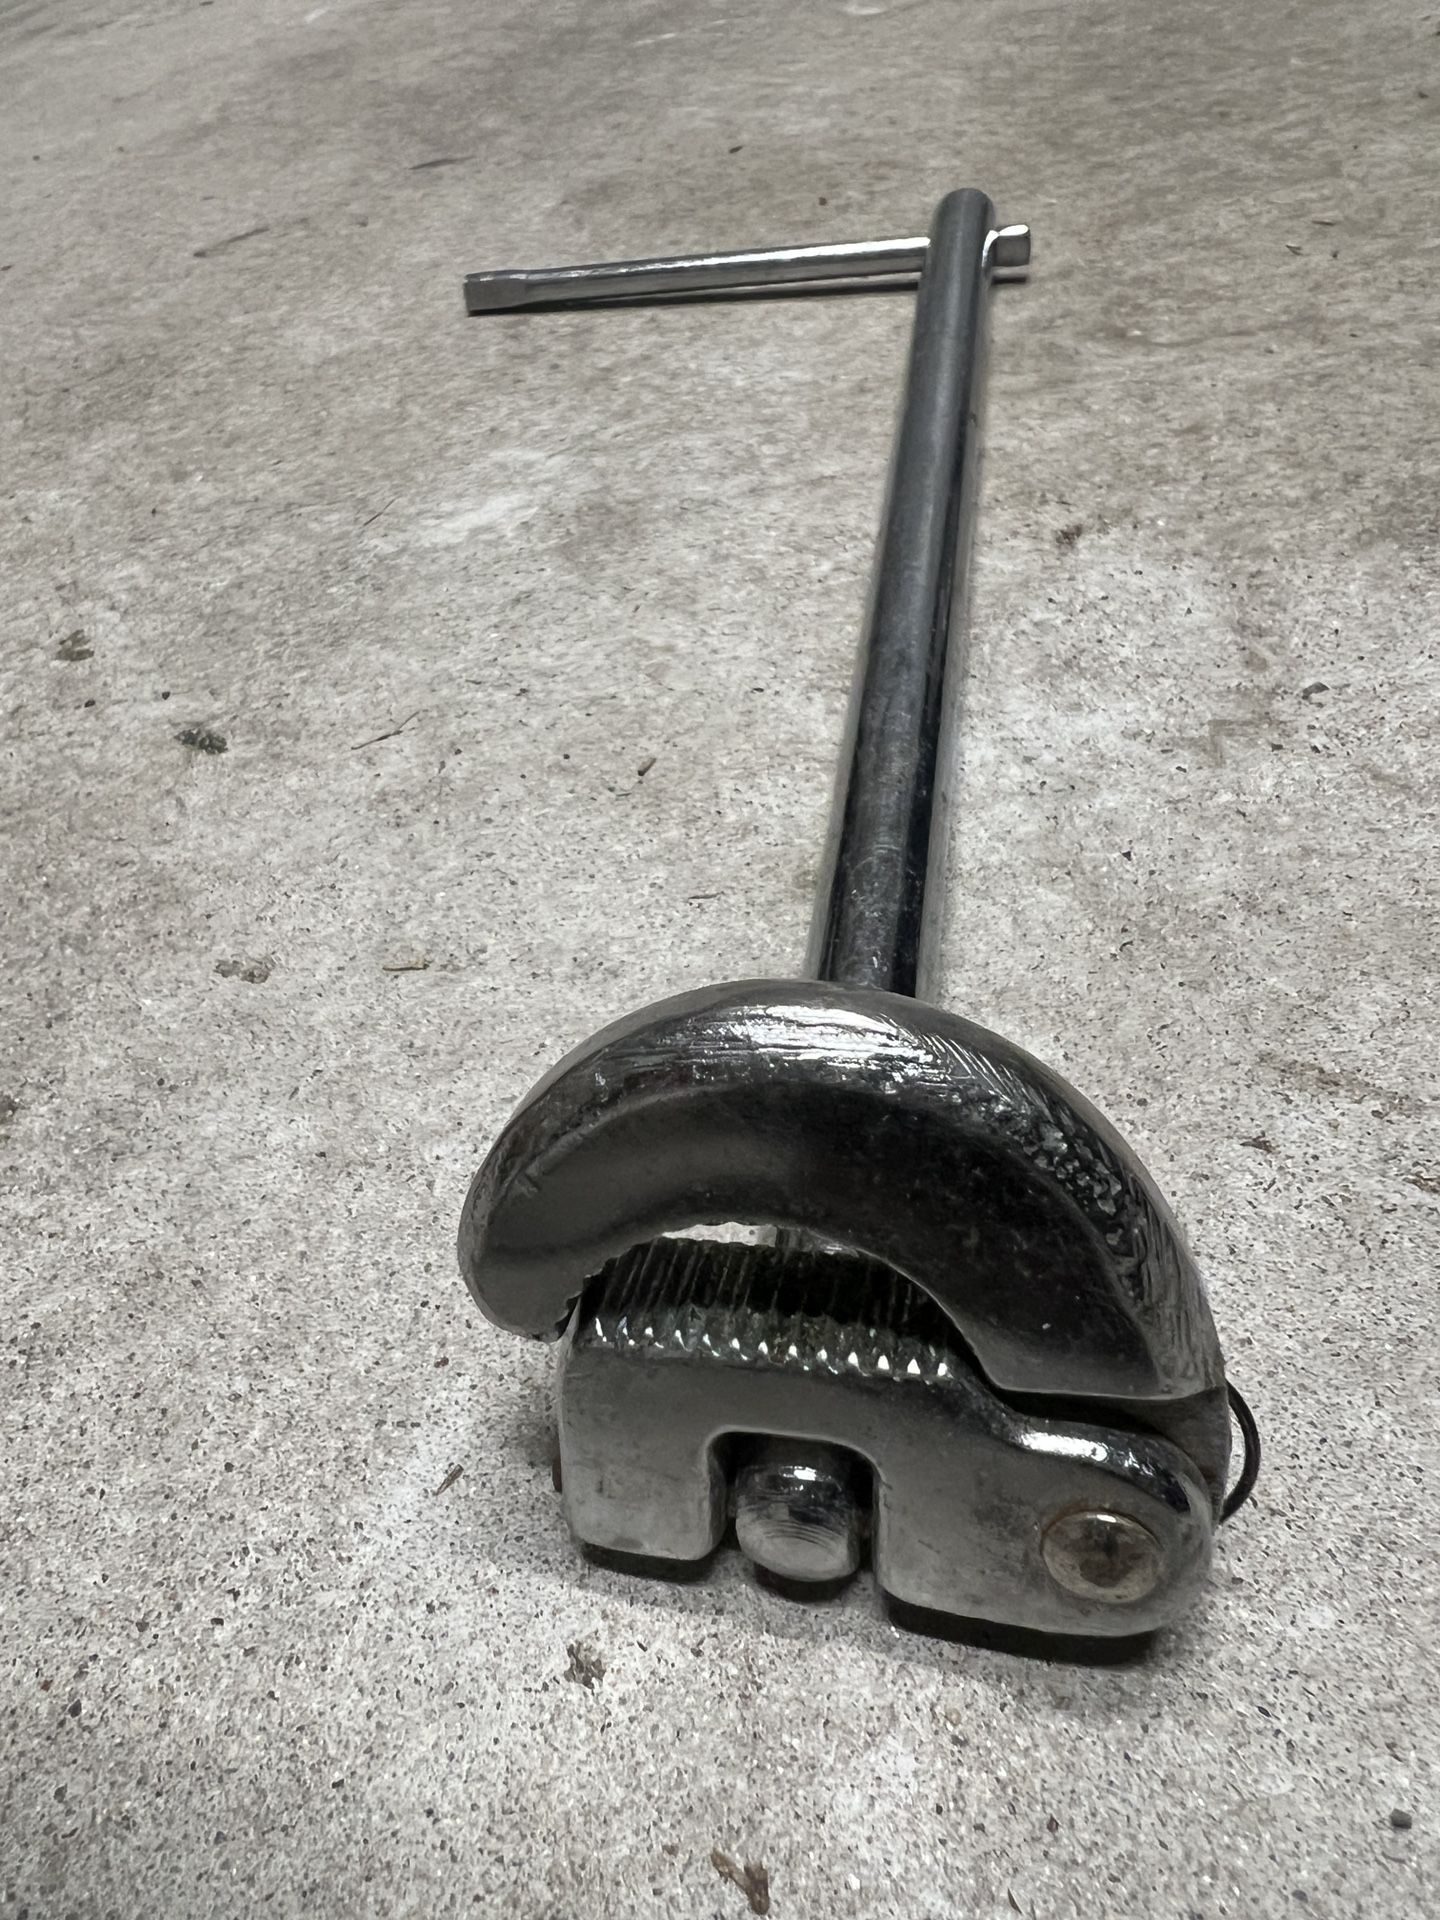 Basin Wrench Price Reduced $8